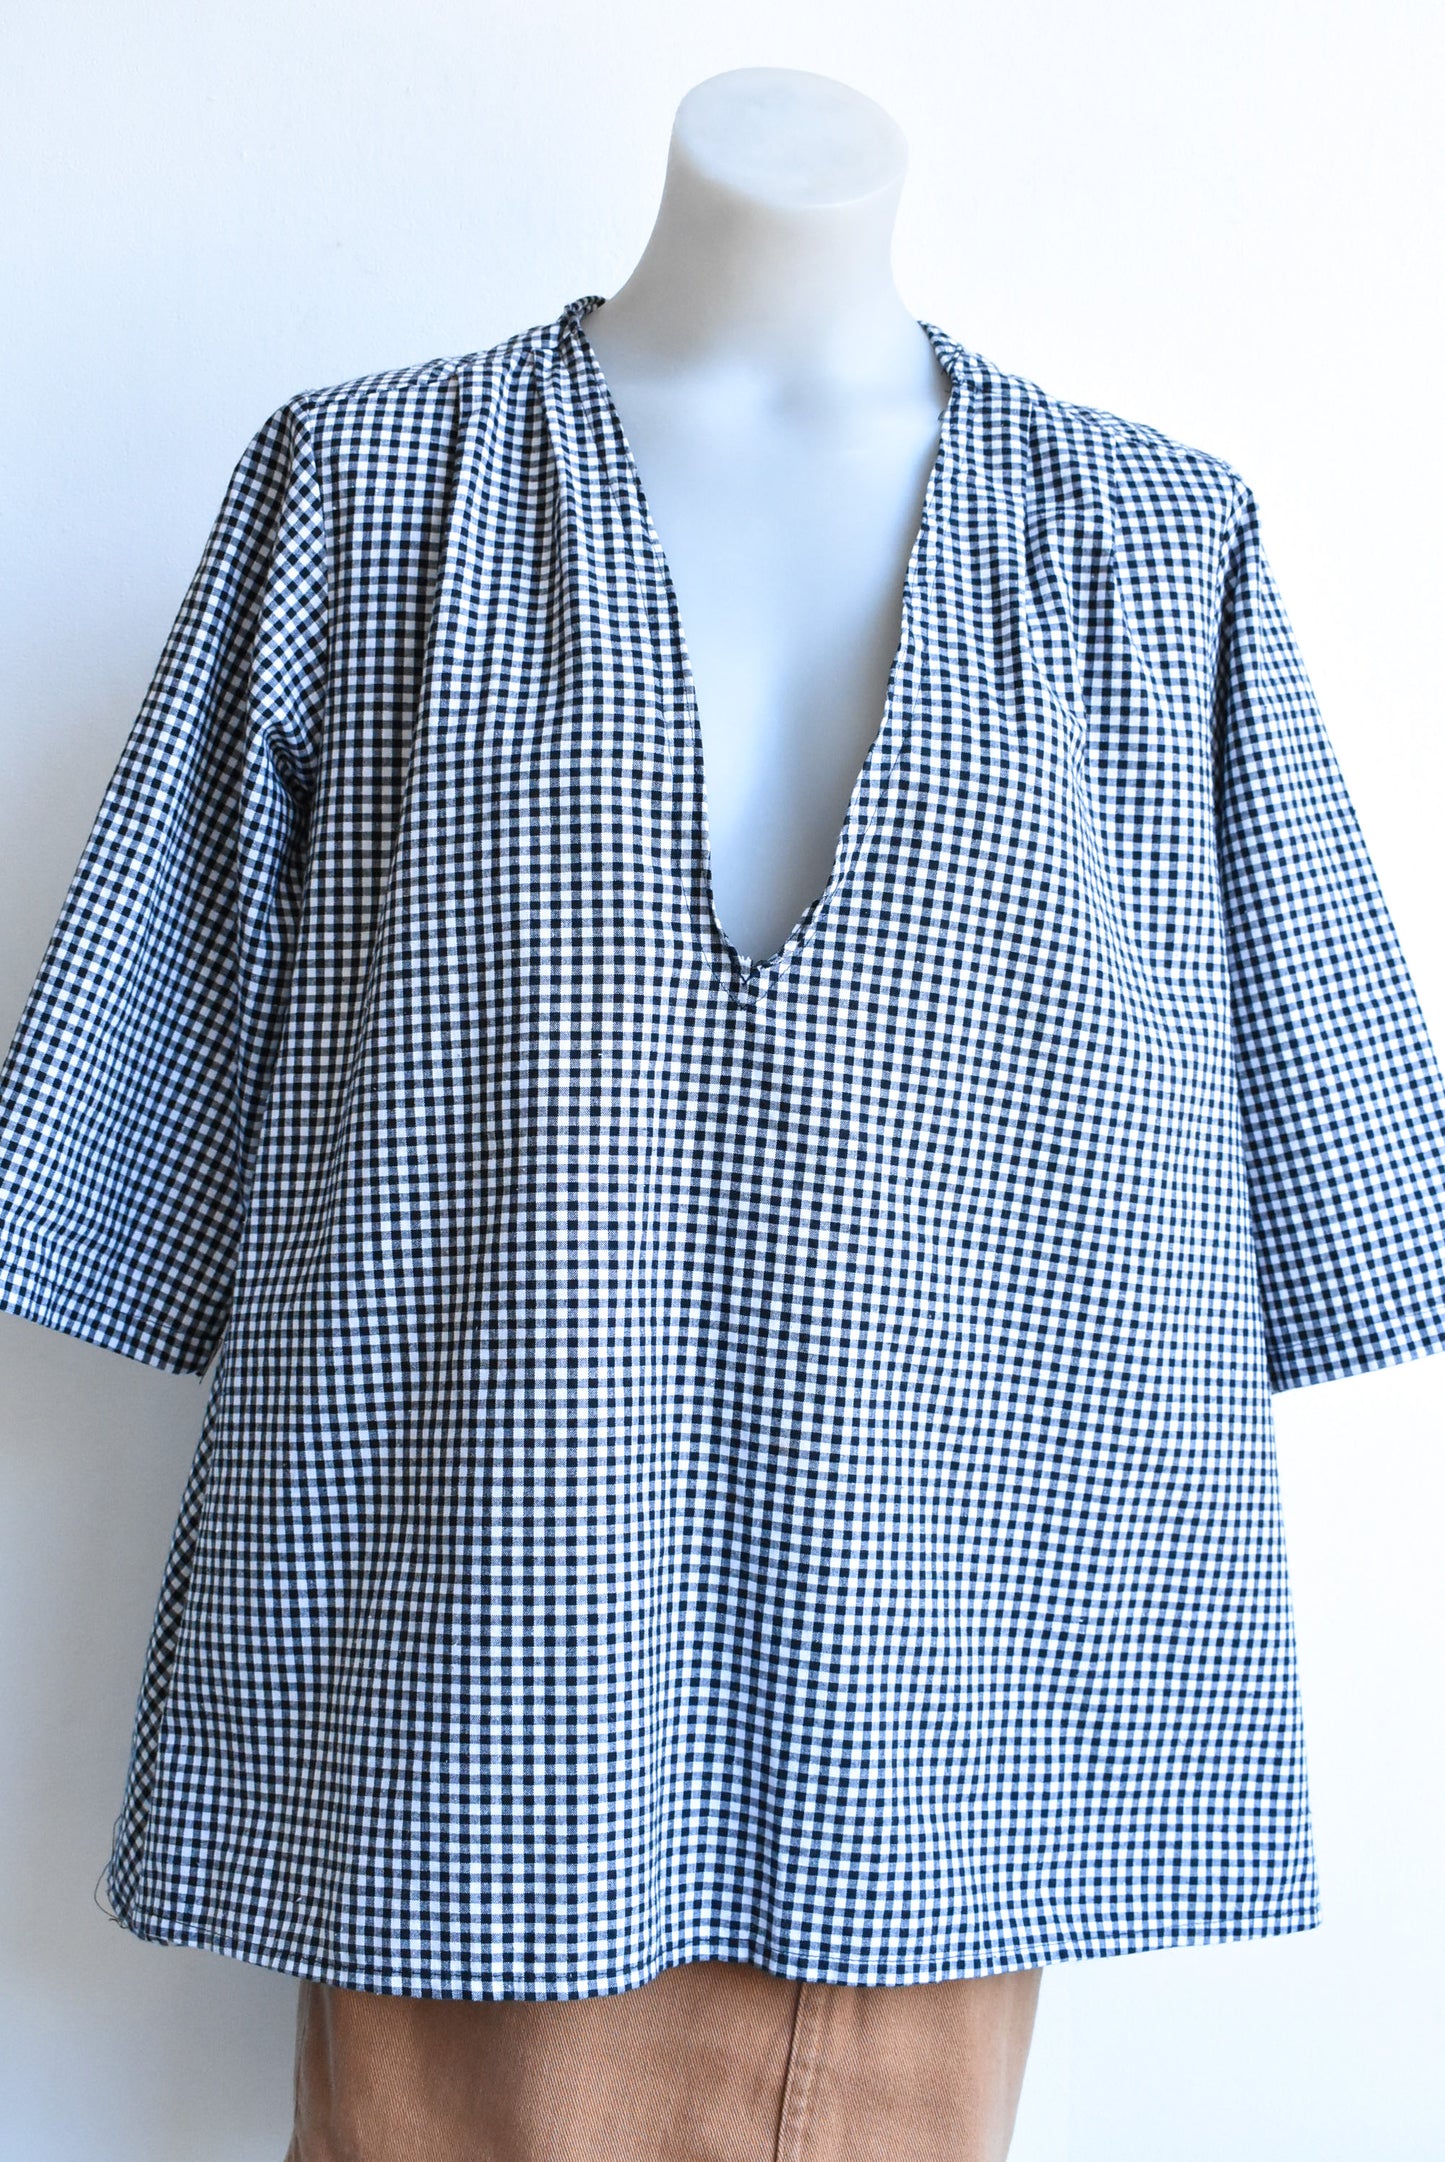 Black and white checked top, size XL